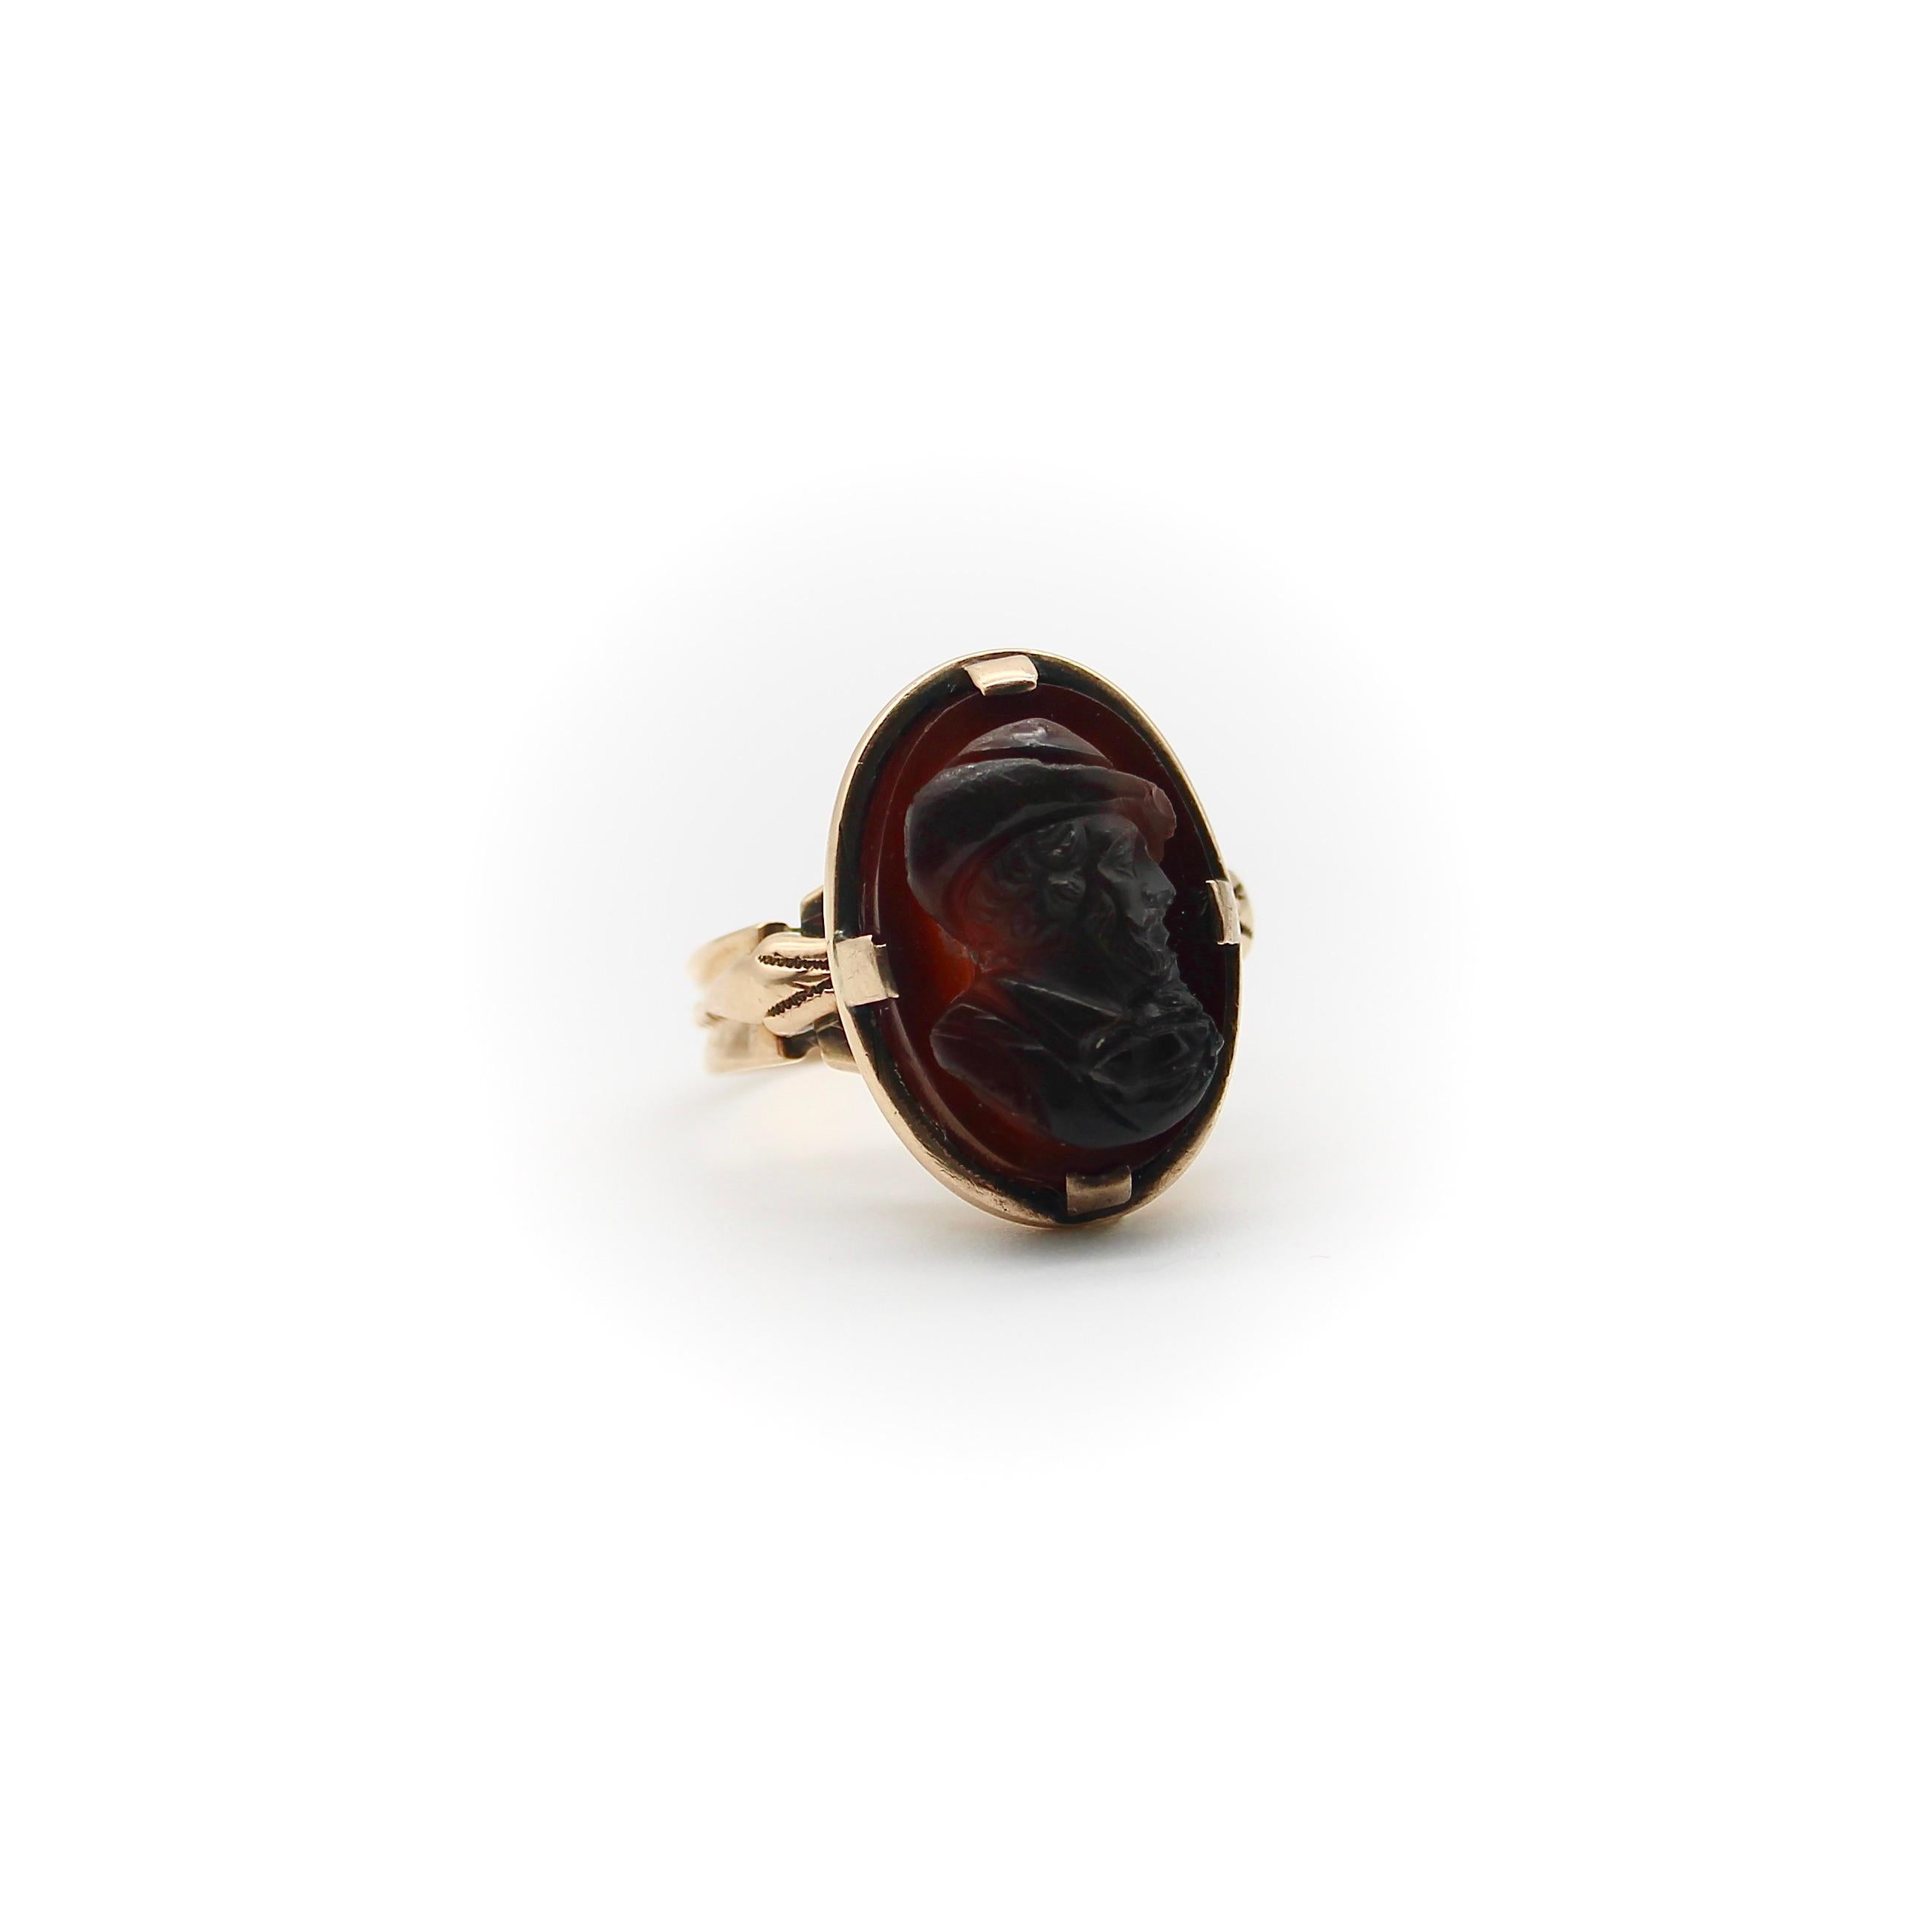 This remarkable 14k rose gold agate cameo ring features the portrait of a gentleman, depicted in profile wearing a hat and looking off into the distance. The agate is dark reddish brown, a nice compliment to the rose gold that the stone is set into.